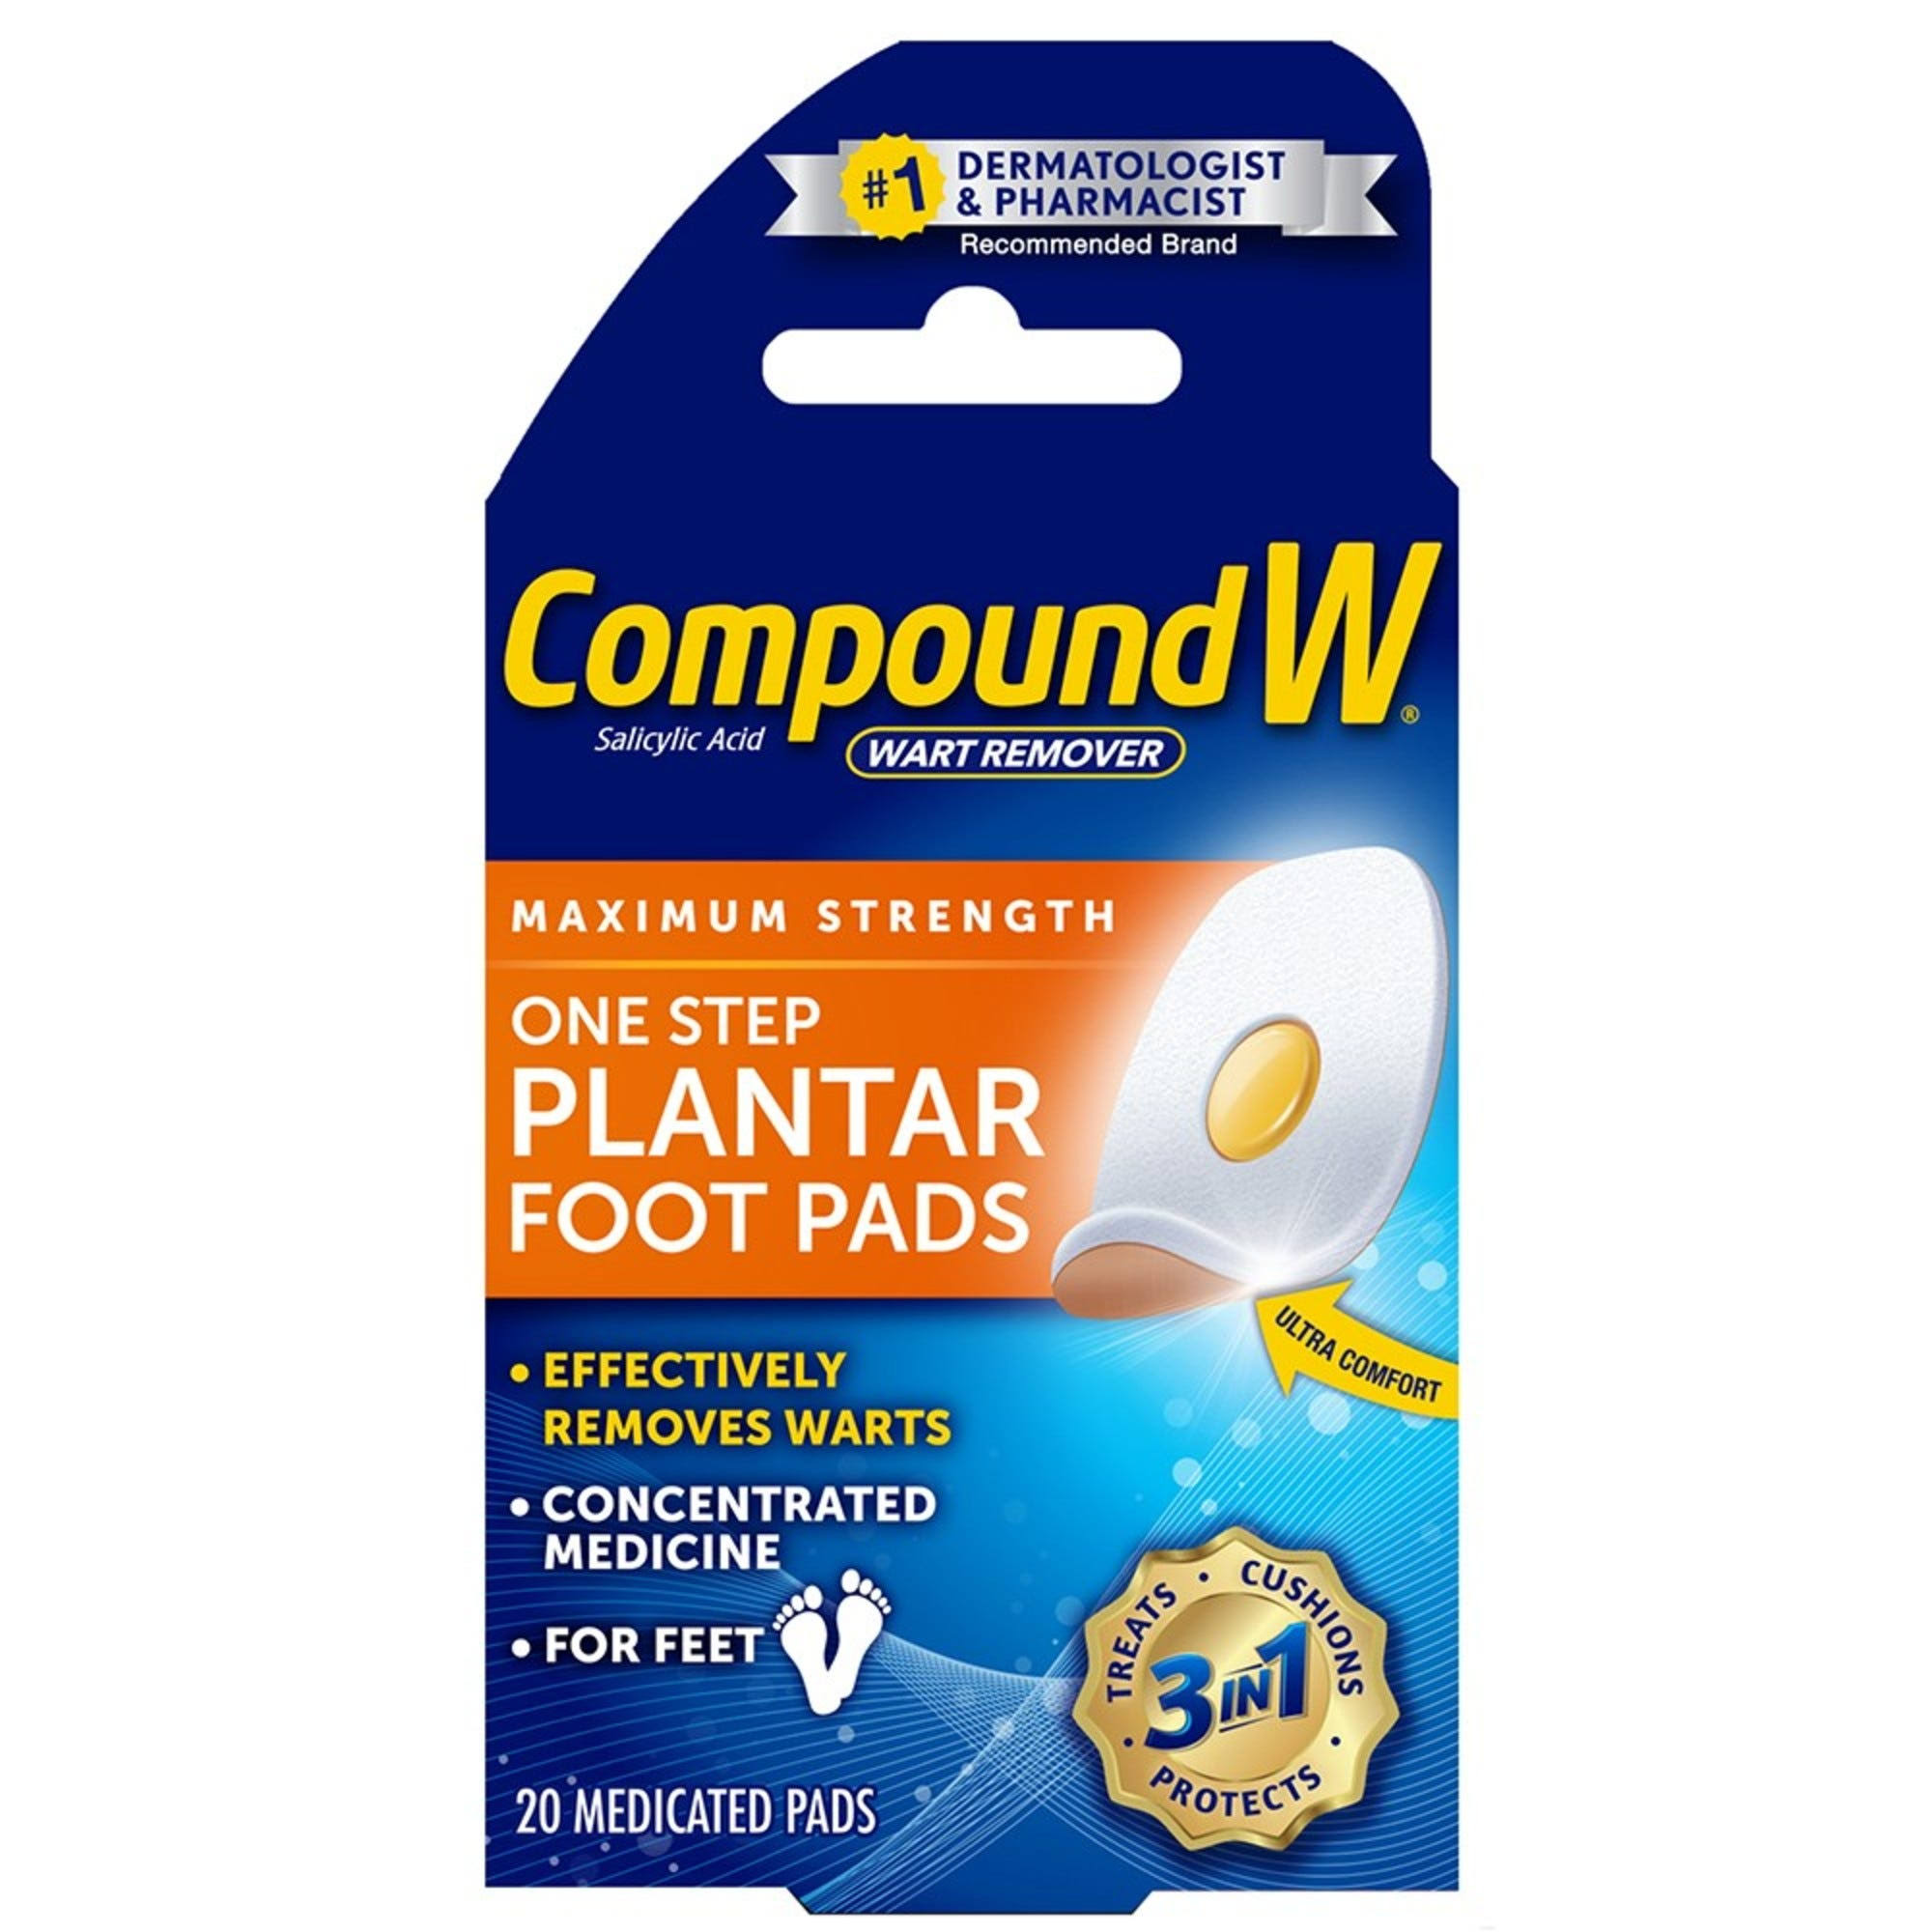 Compound W Wart Remover, One Step Plantar Foot Pads - 20 Ct